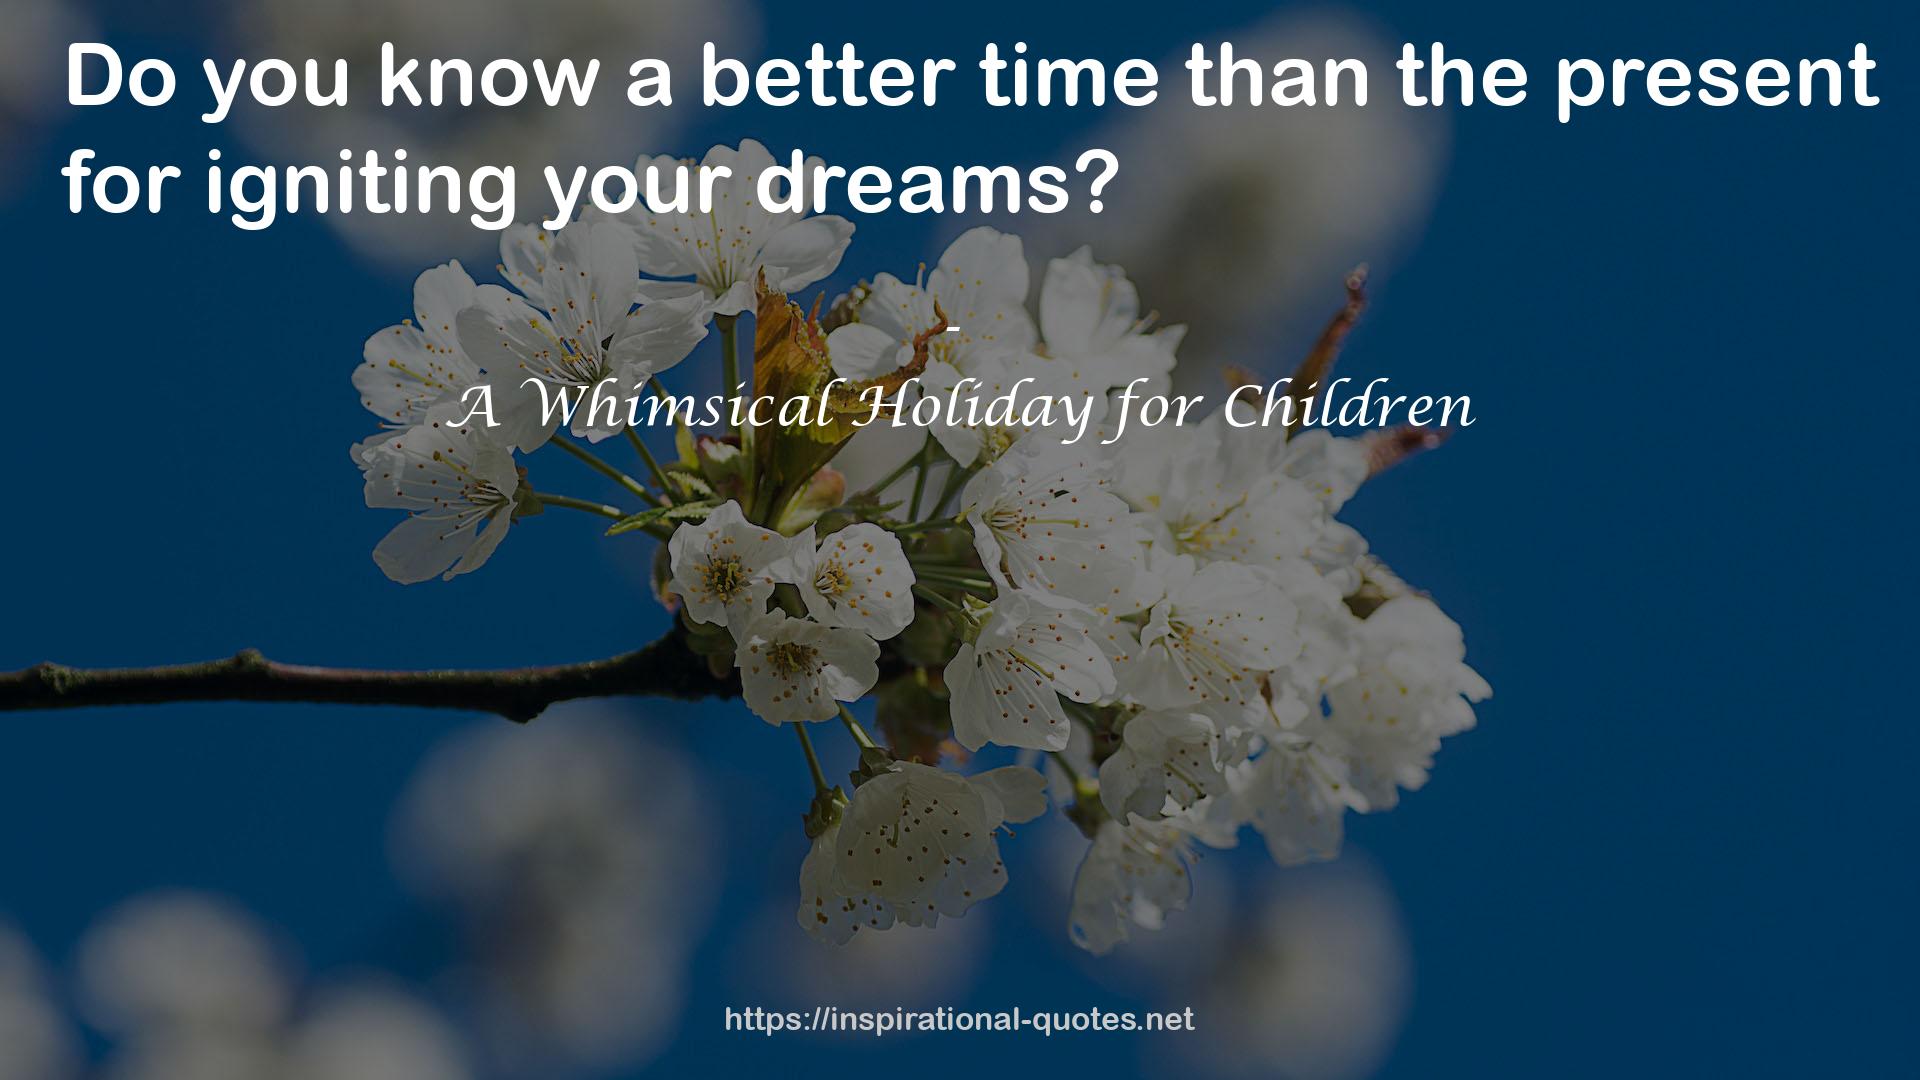 A Whimsical Holiday for Children QUOTES